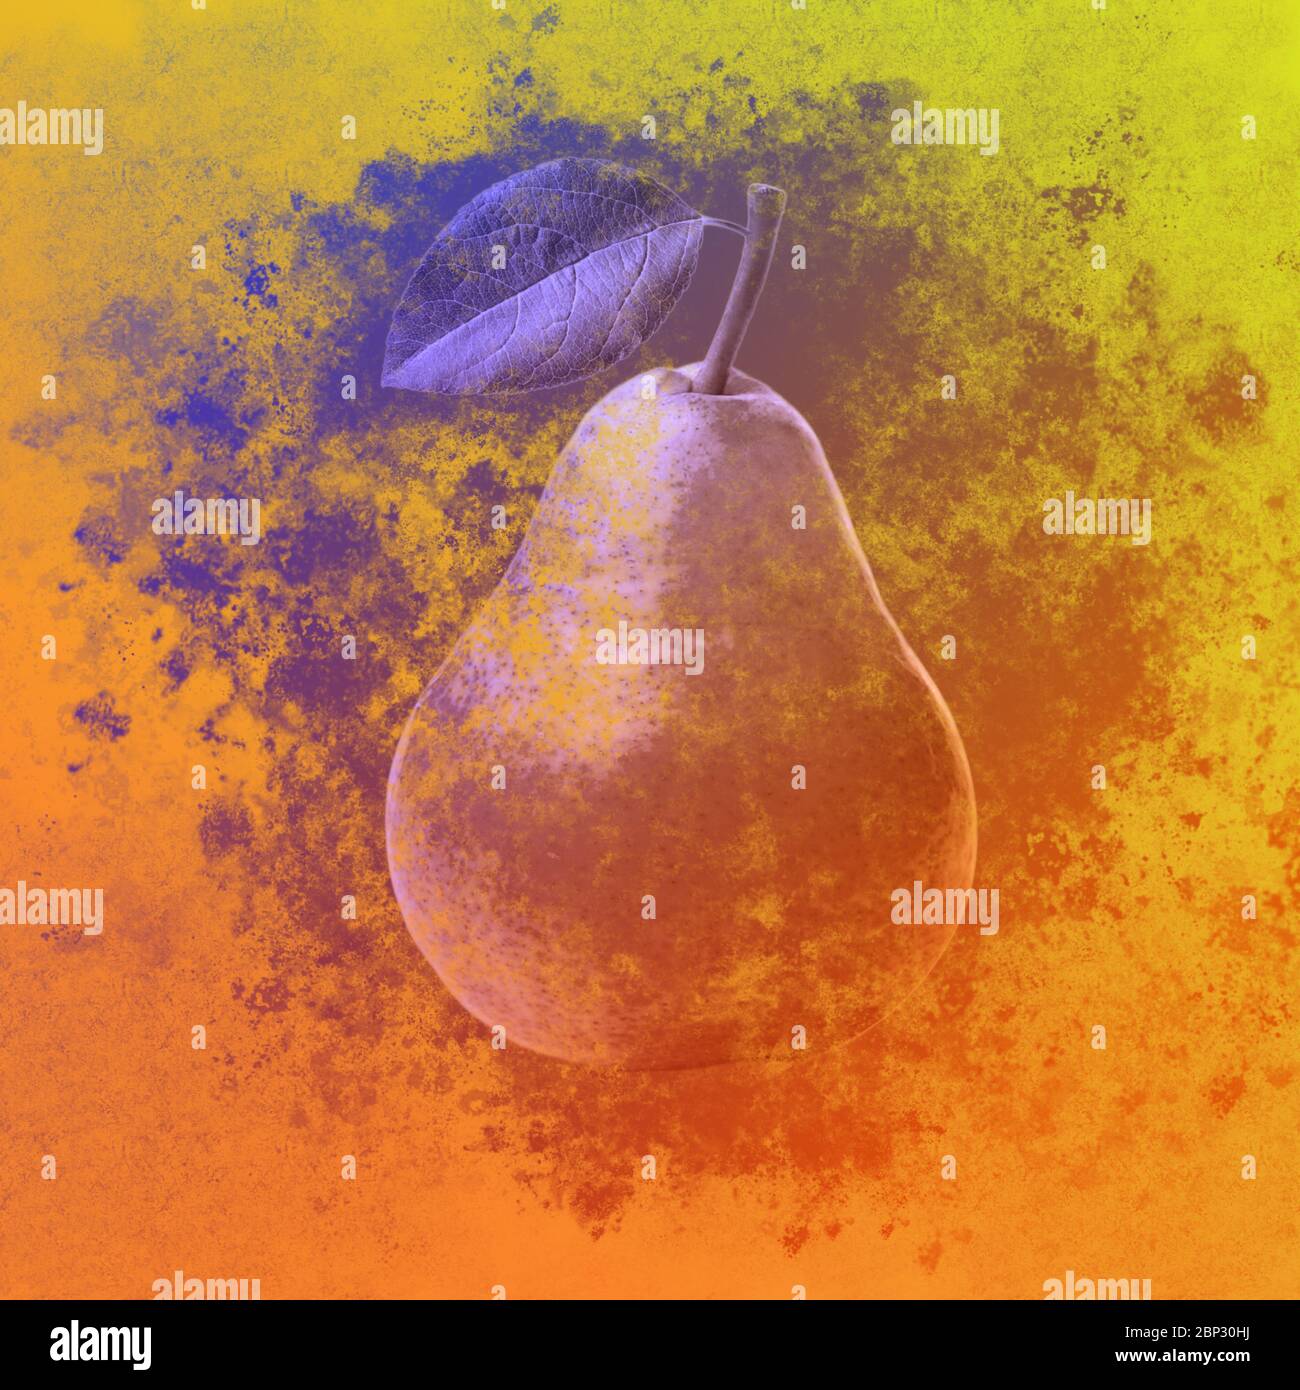 Pear illustration with splatter textured style and colored background Stock Photo